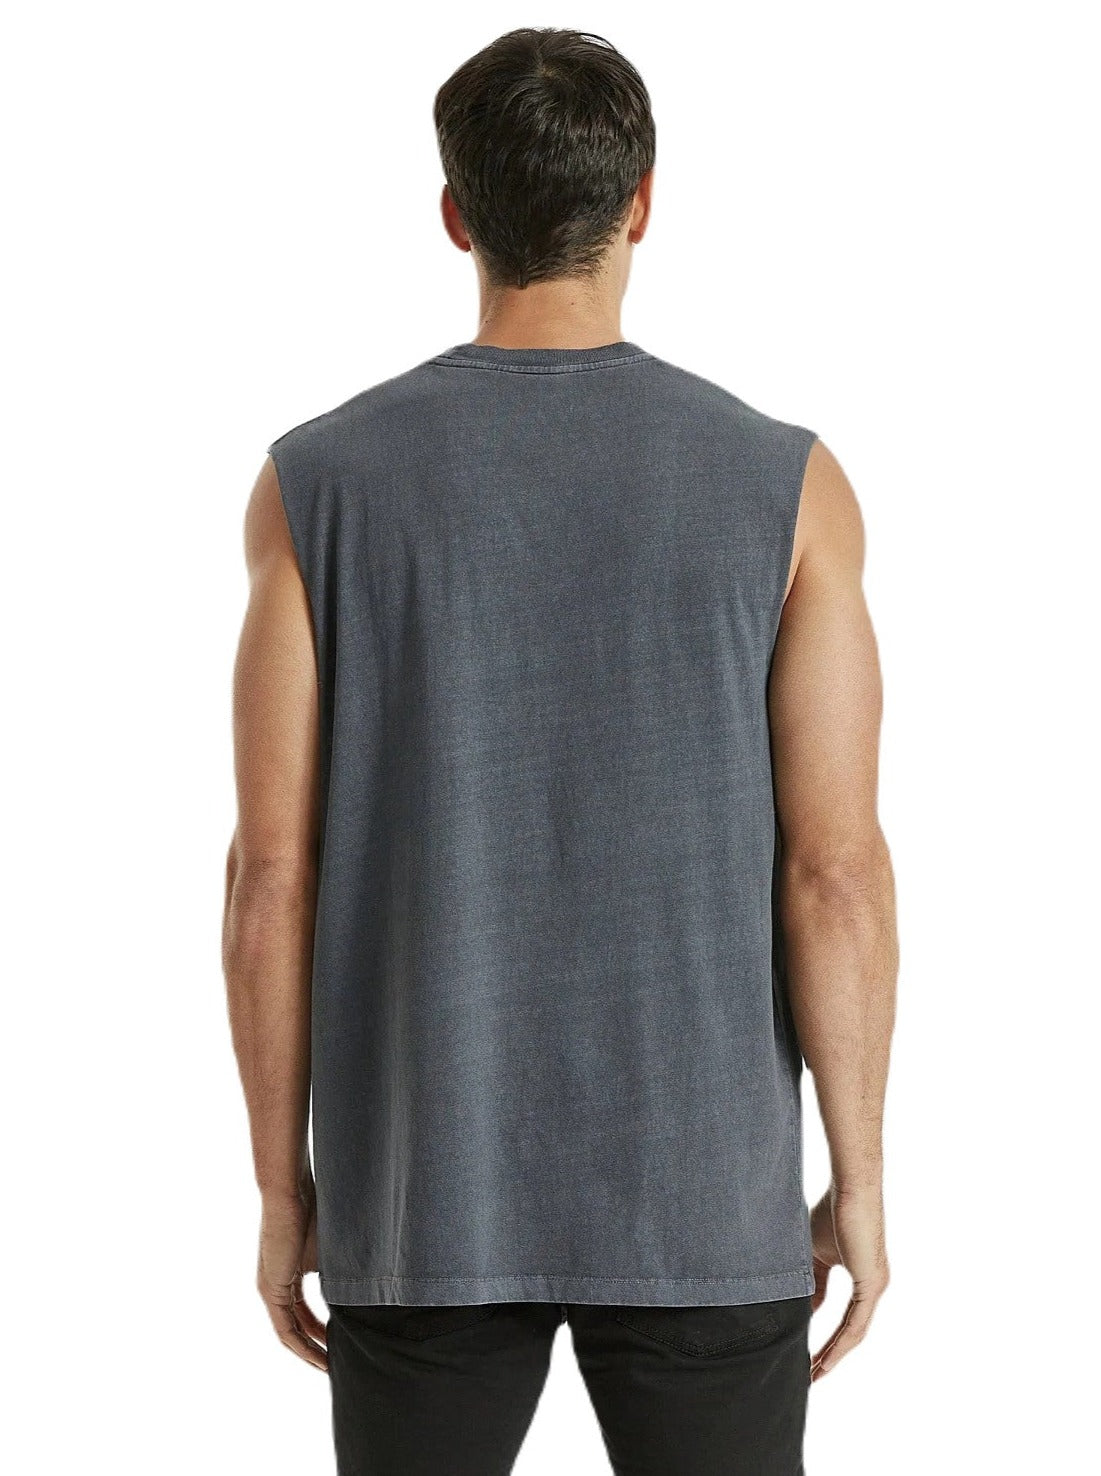 Kiss Chacey - Thorn Relaxed Muscle Tee - Pigment Asphalt